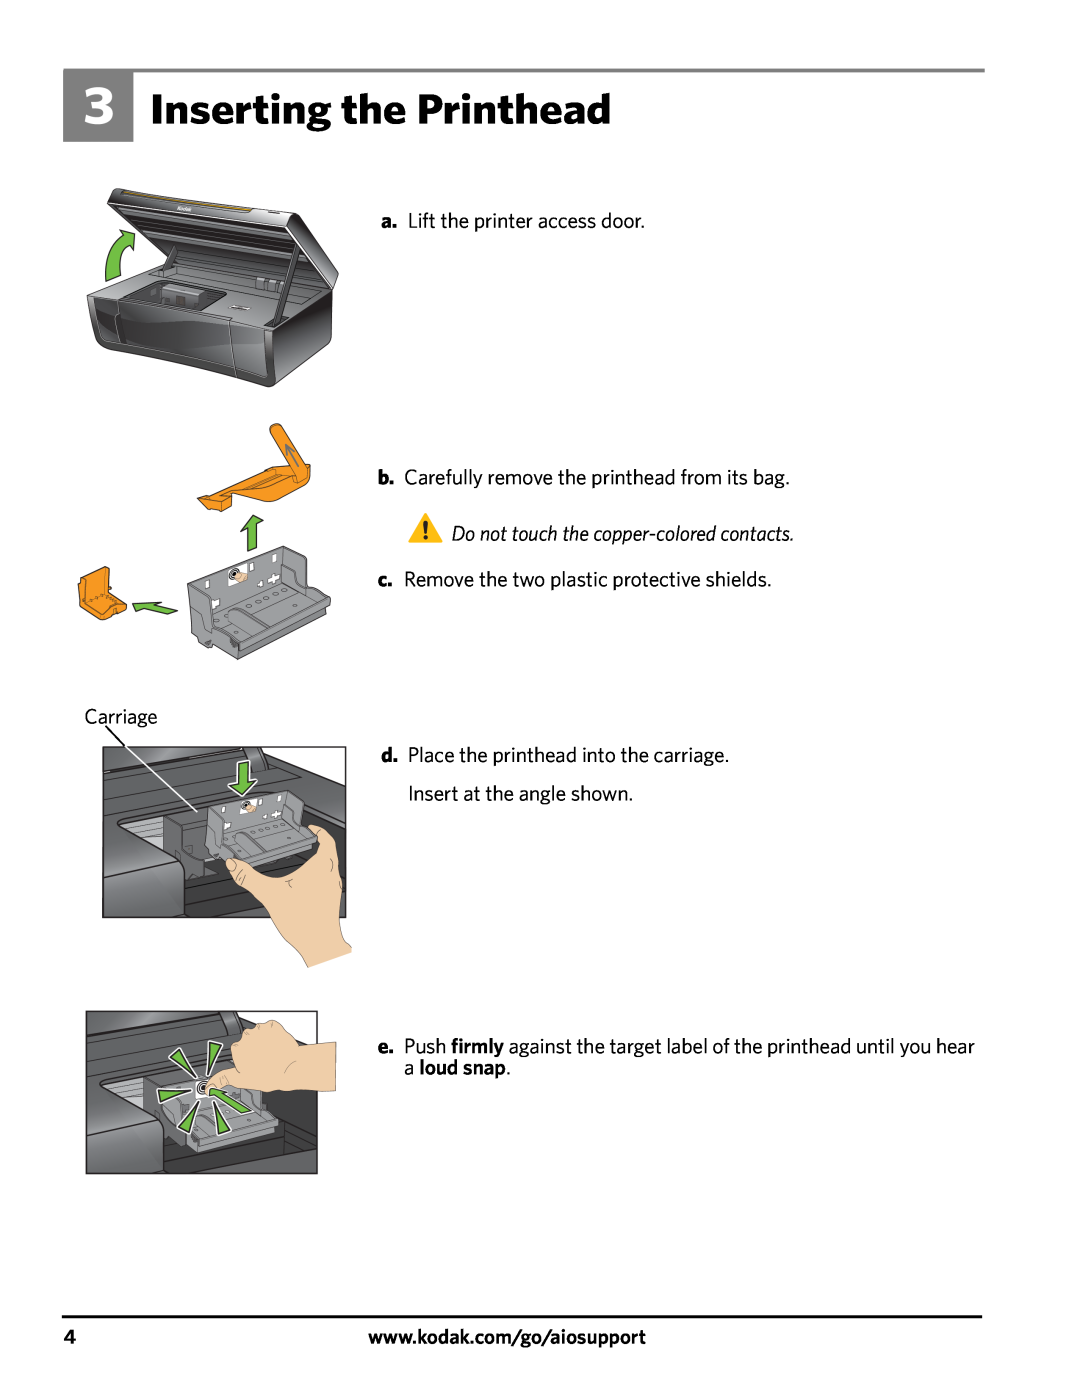 Kodak 3200 Inserting the Printhead, Do not touch the copper-colored contacts, a. Lift the printer access door, Carriage 